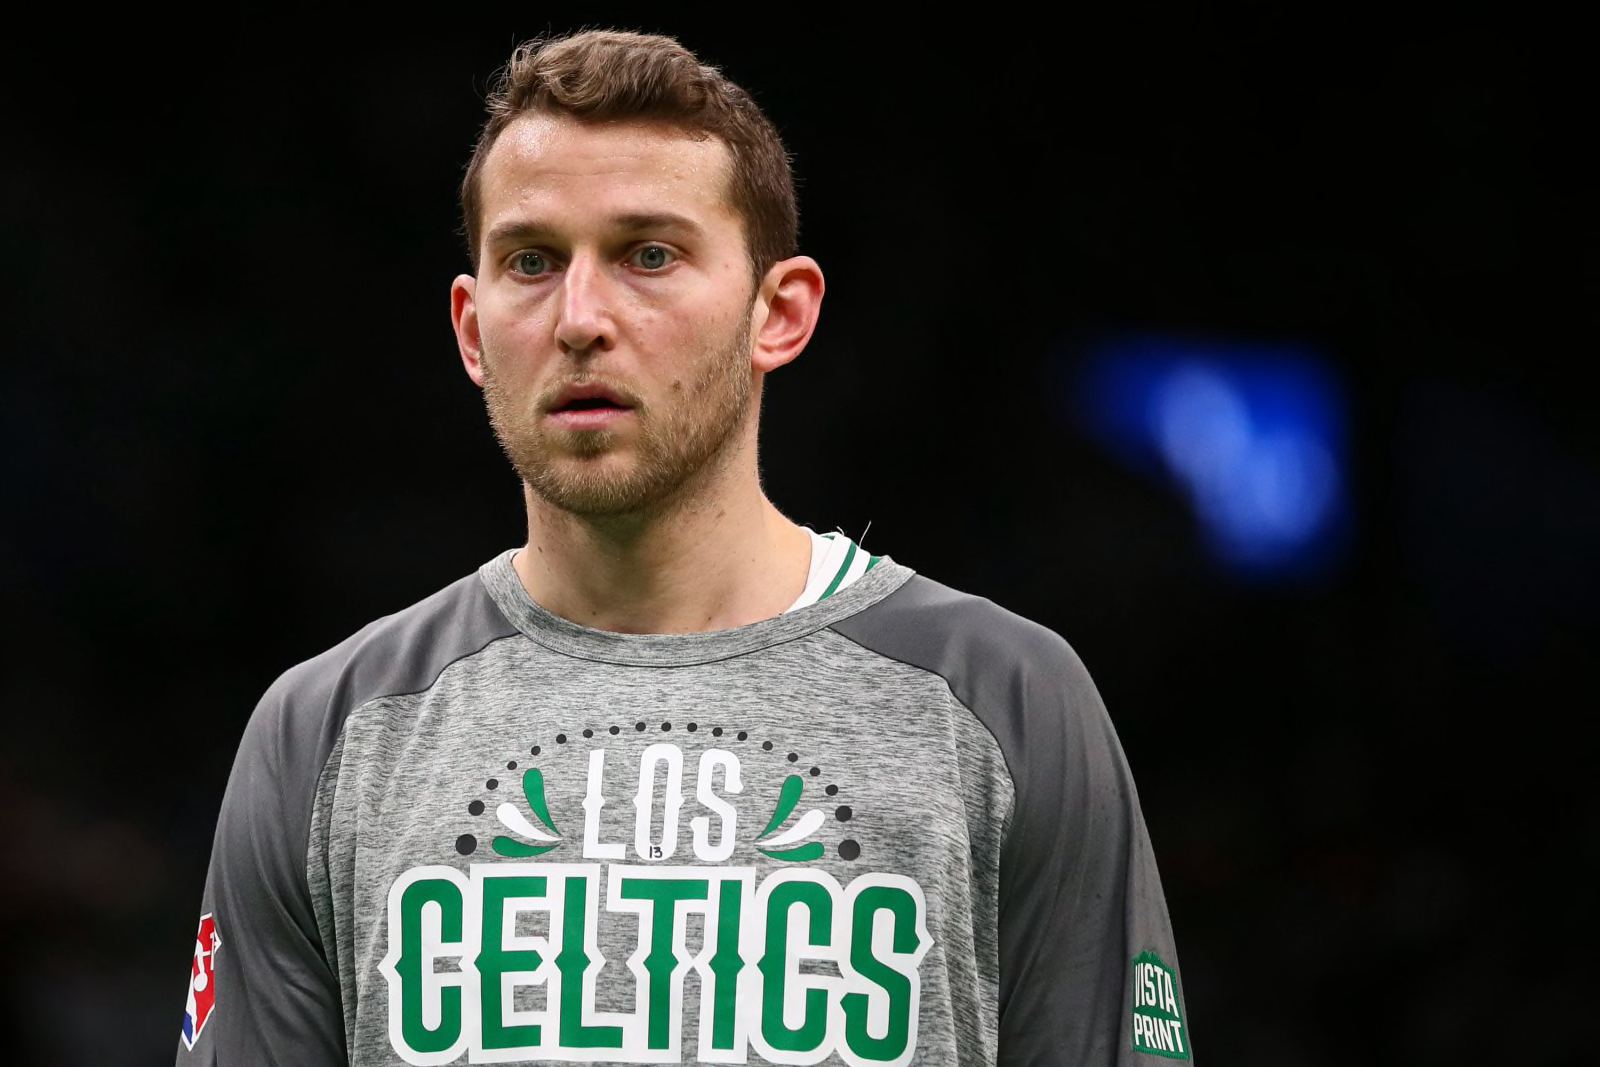 Nik Stauskas, Celtics Agree To Two-Year Contract - Hoops Wire